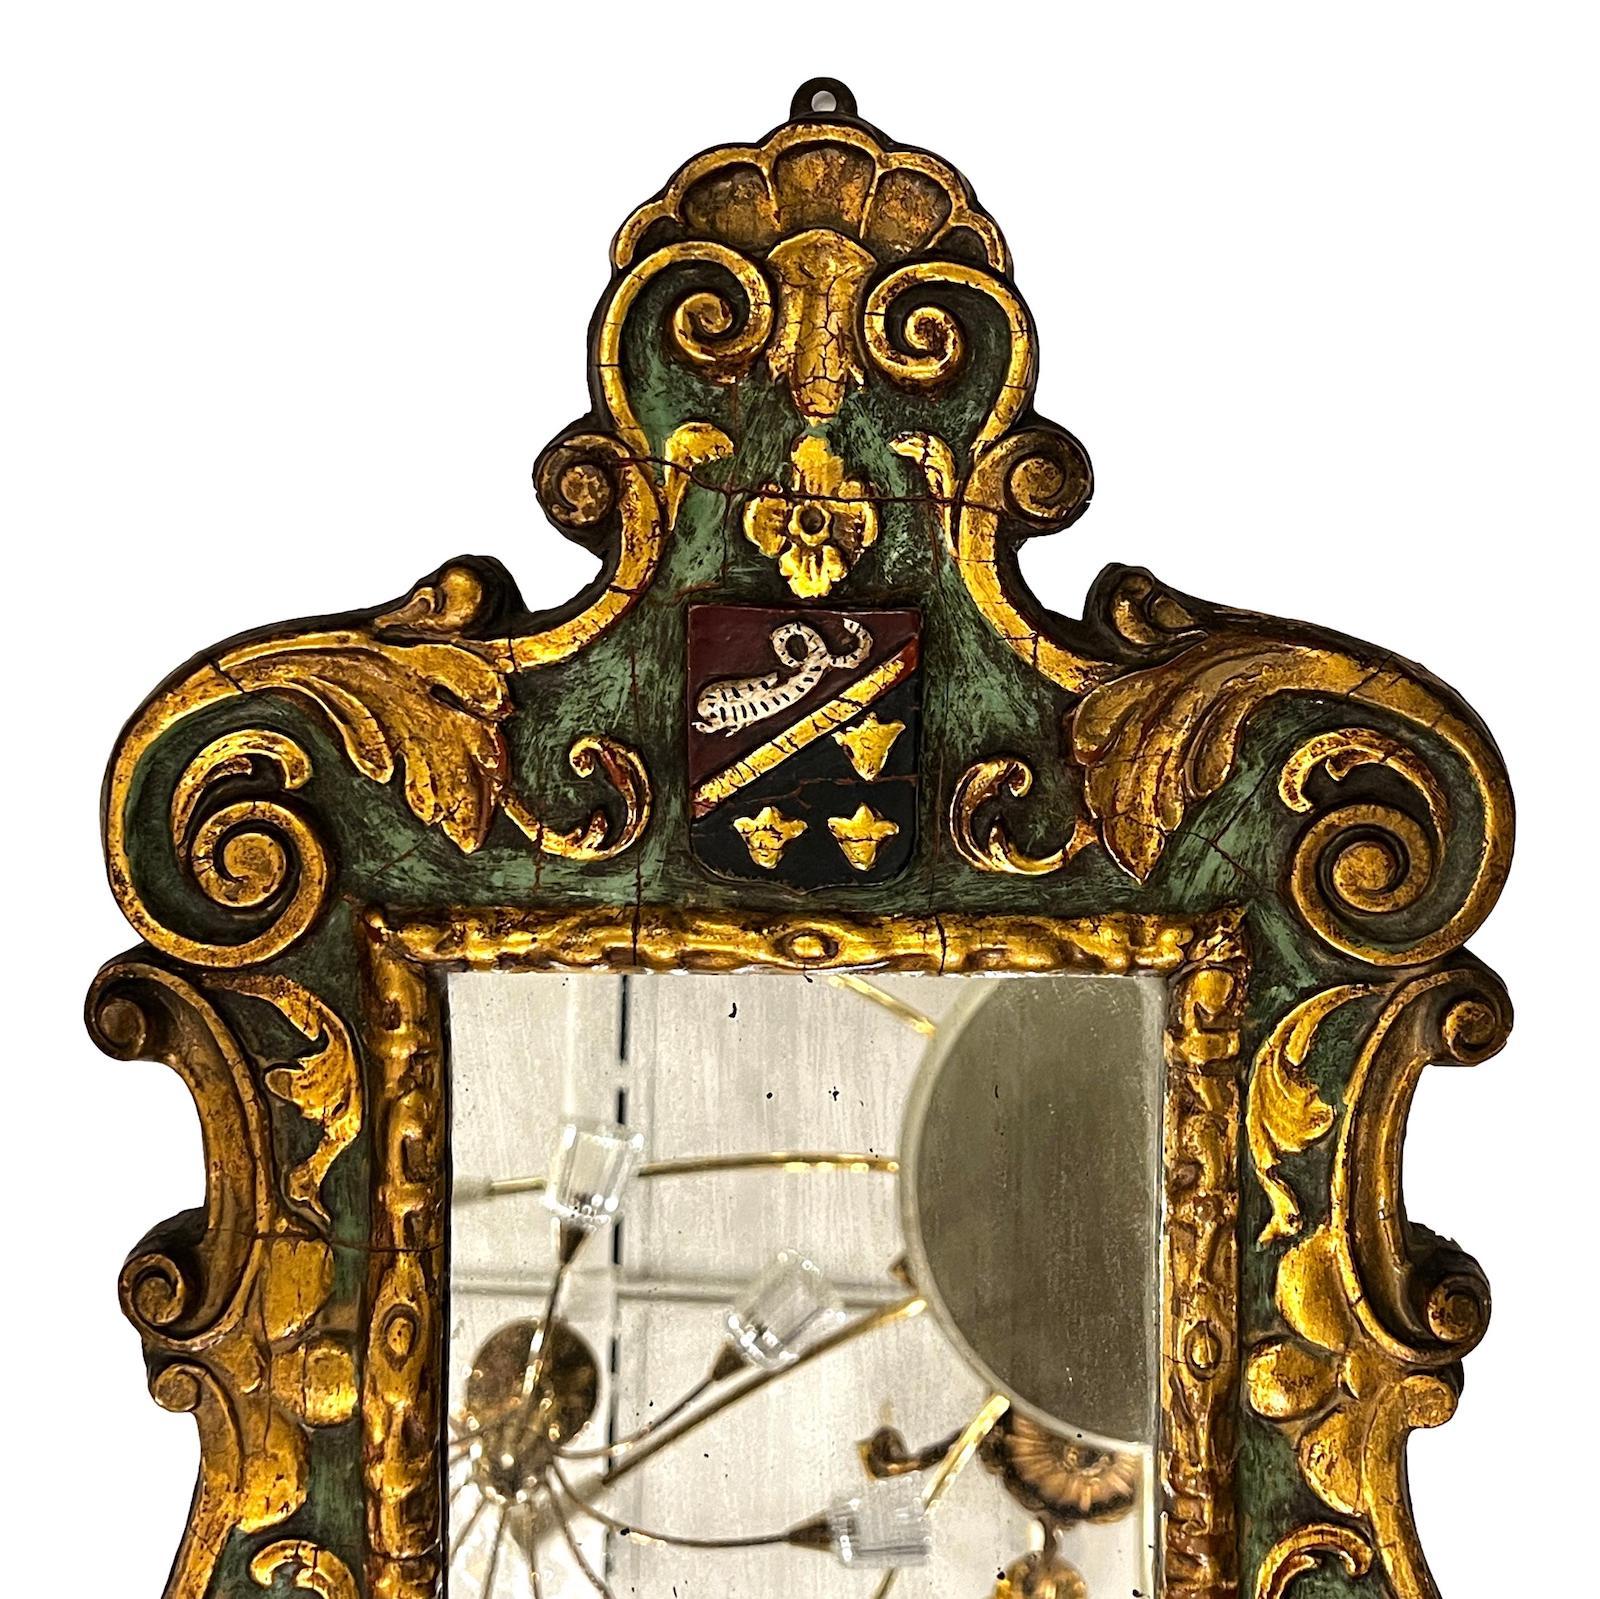 A circa 1920's French carved, gilt and painted mirror with crest detail.

Measurements:
Height: 25